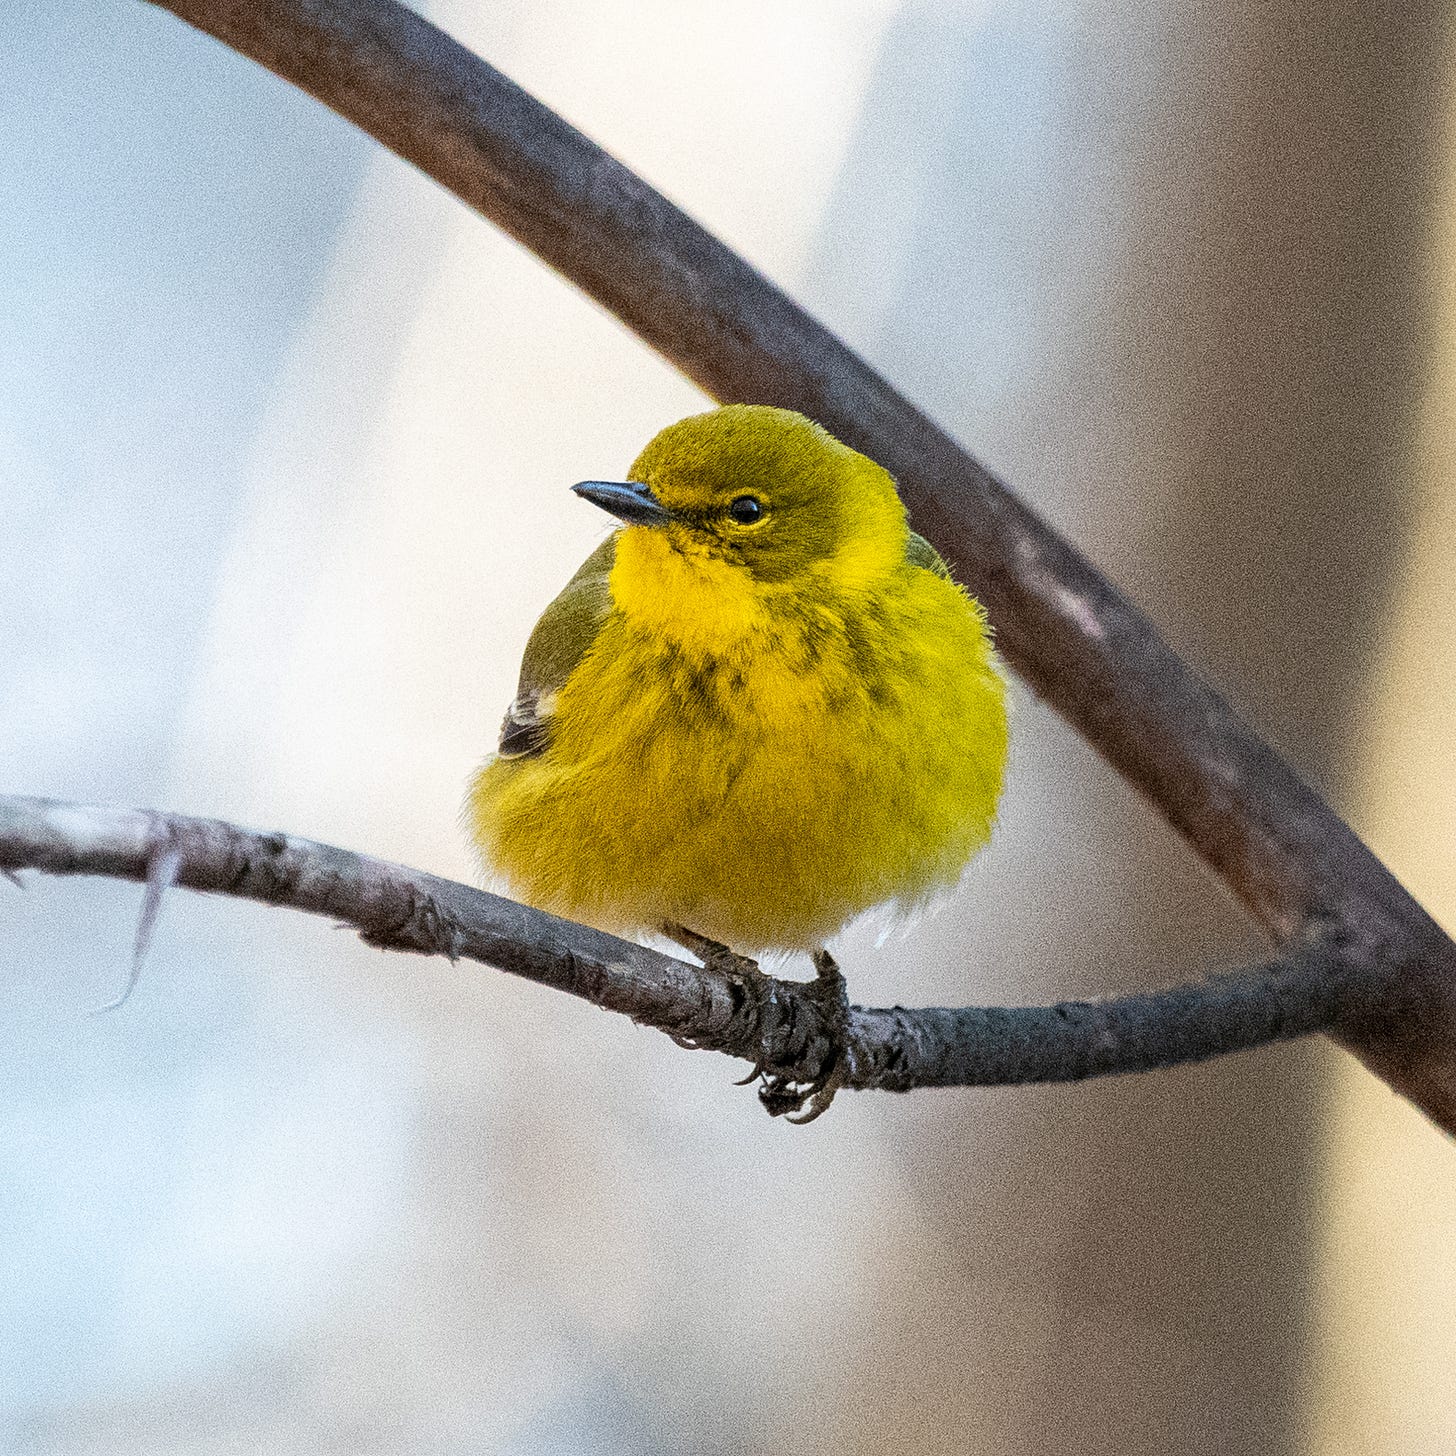 A yellow puffball of a pine warbler, with a bright yellow chin and a greenish-gray face, looks side-eyed at the camera